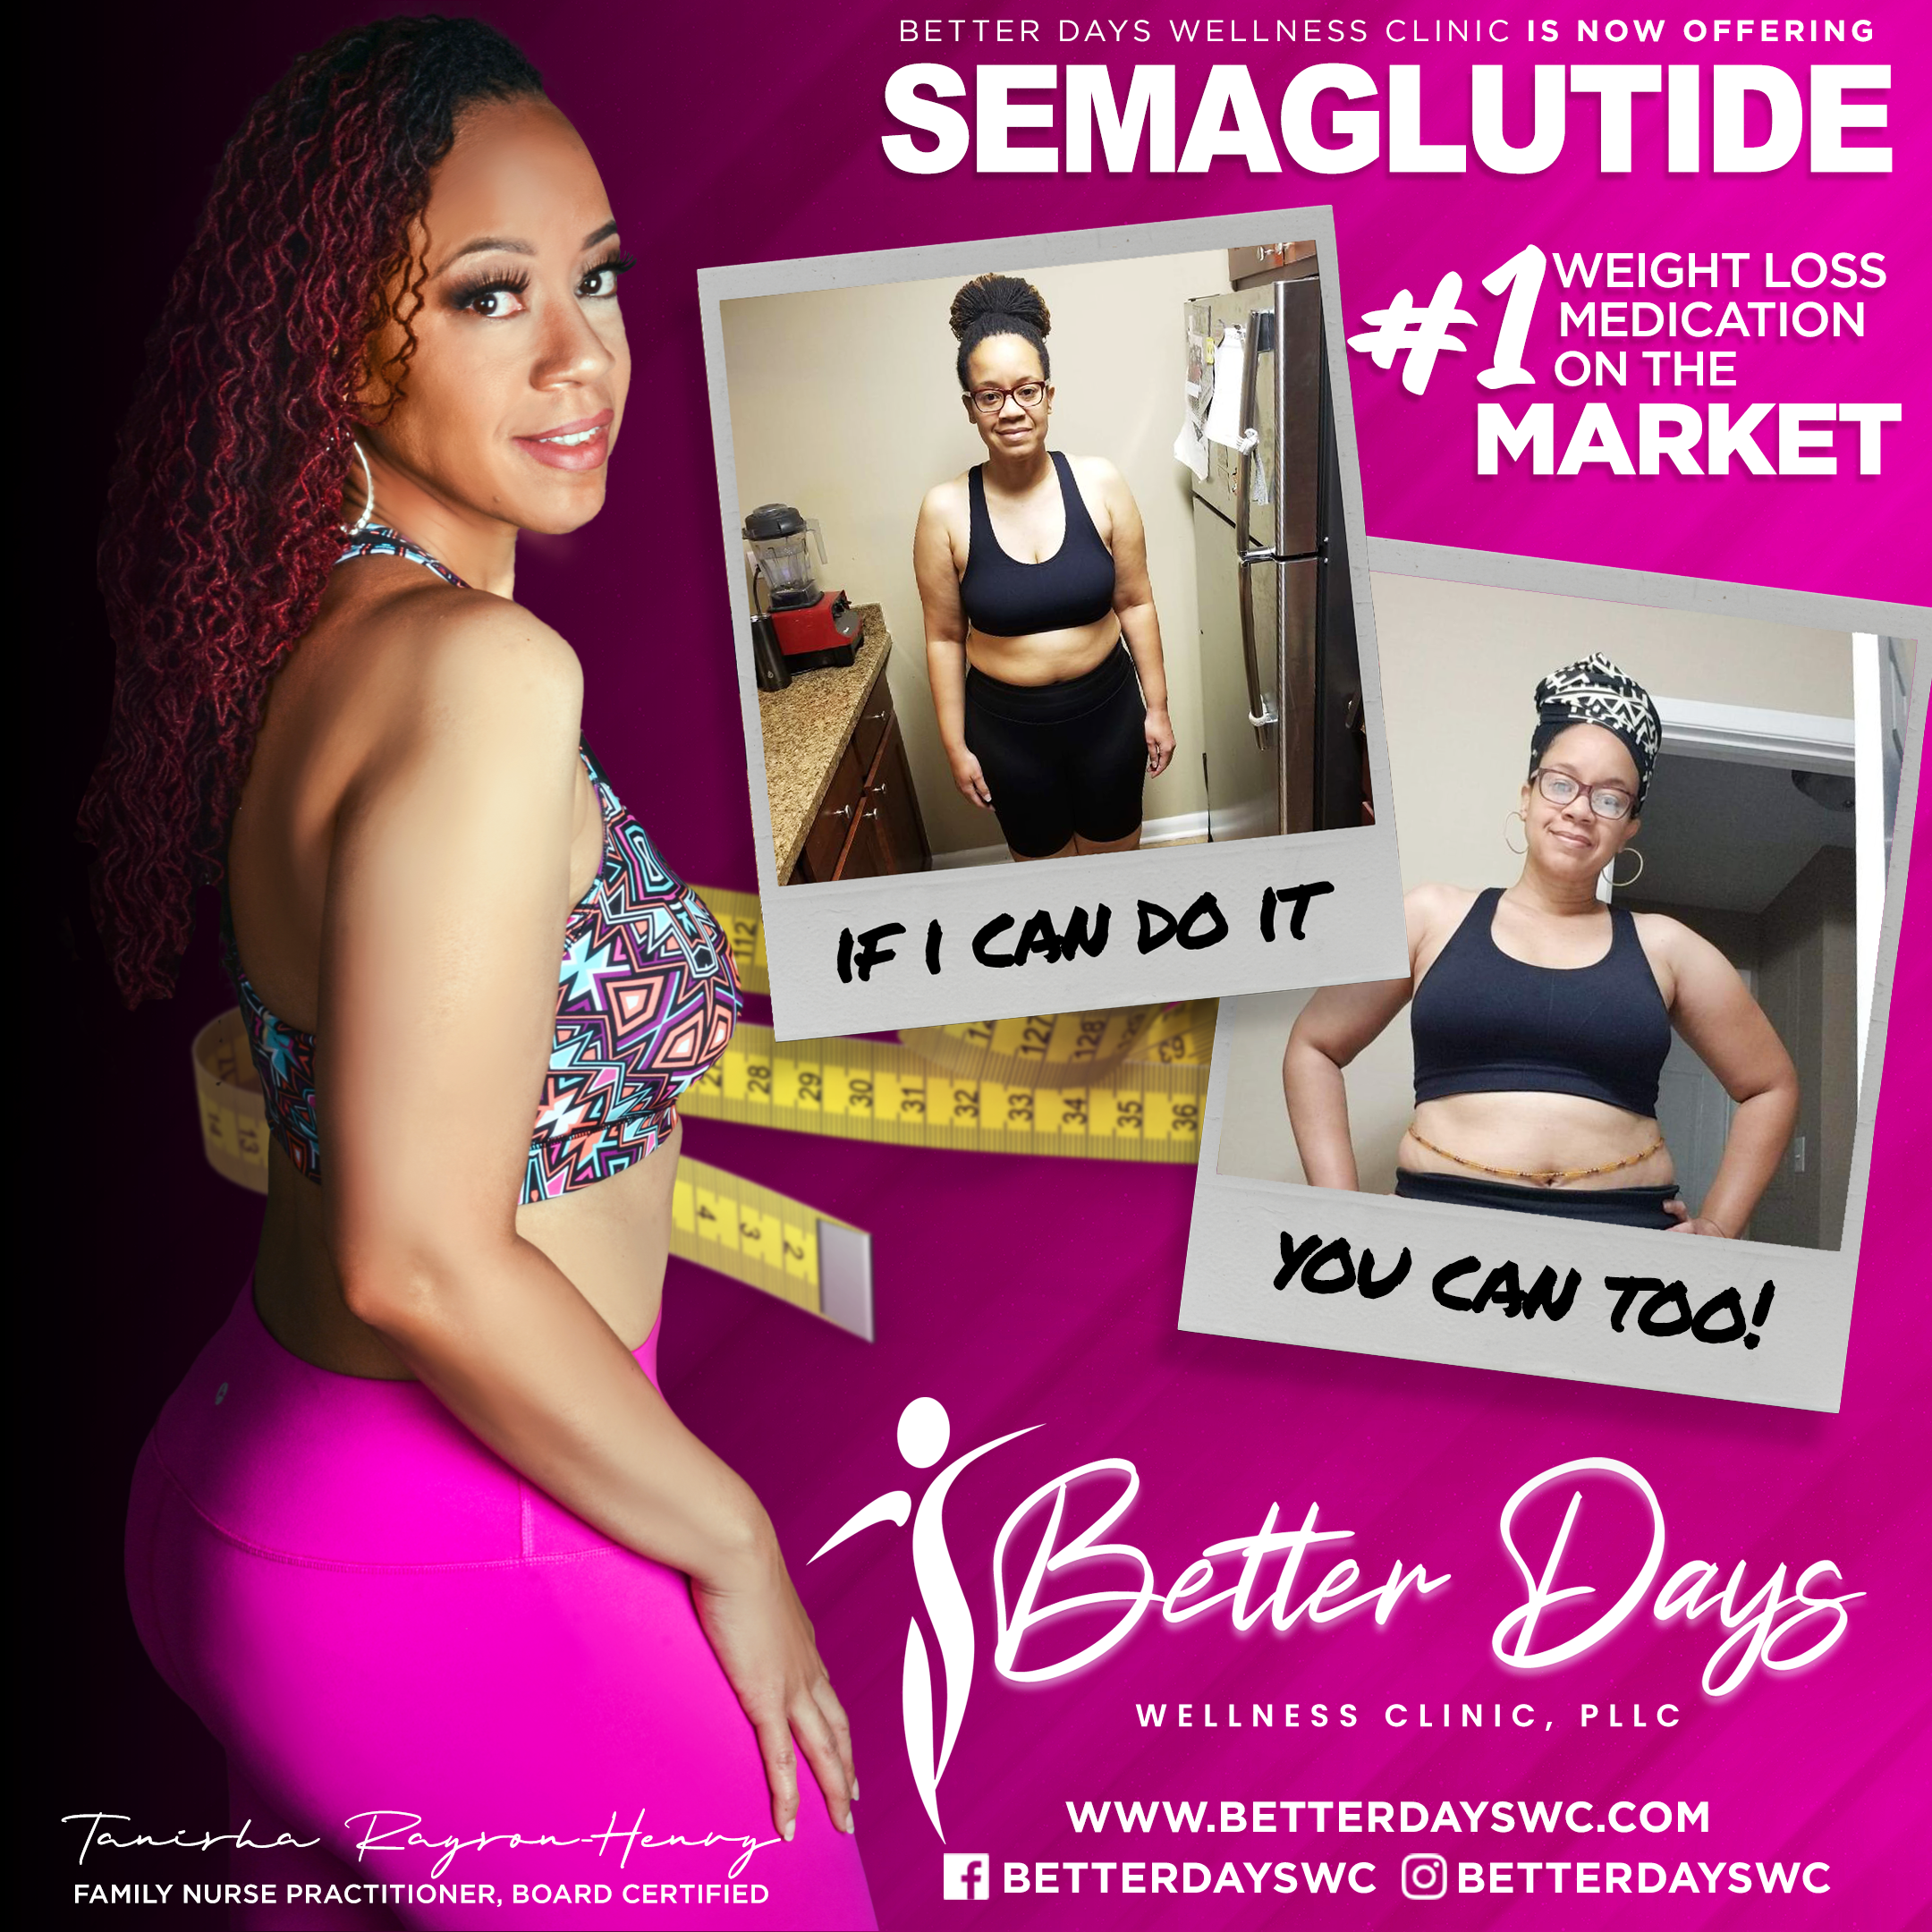 Weight Loss That Actually Works! Semaglutide Is Here! - Complete Wellness, Missouri City, TX